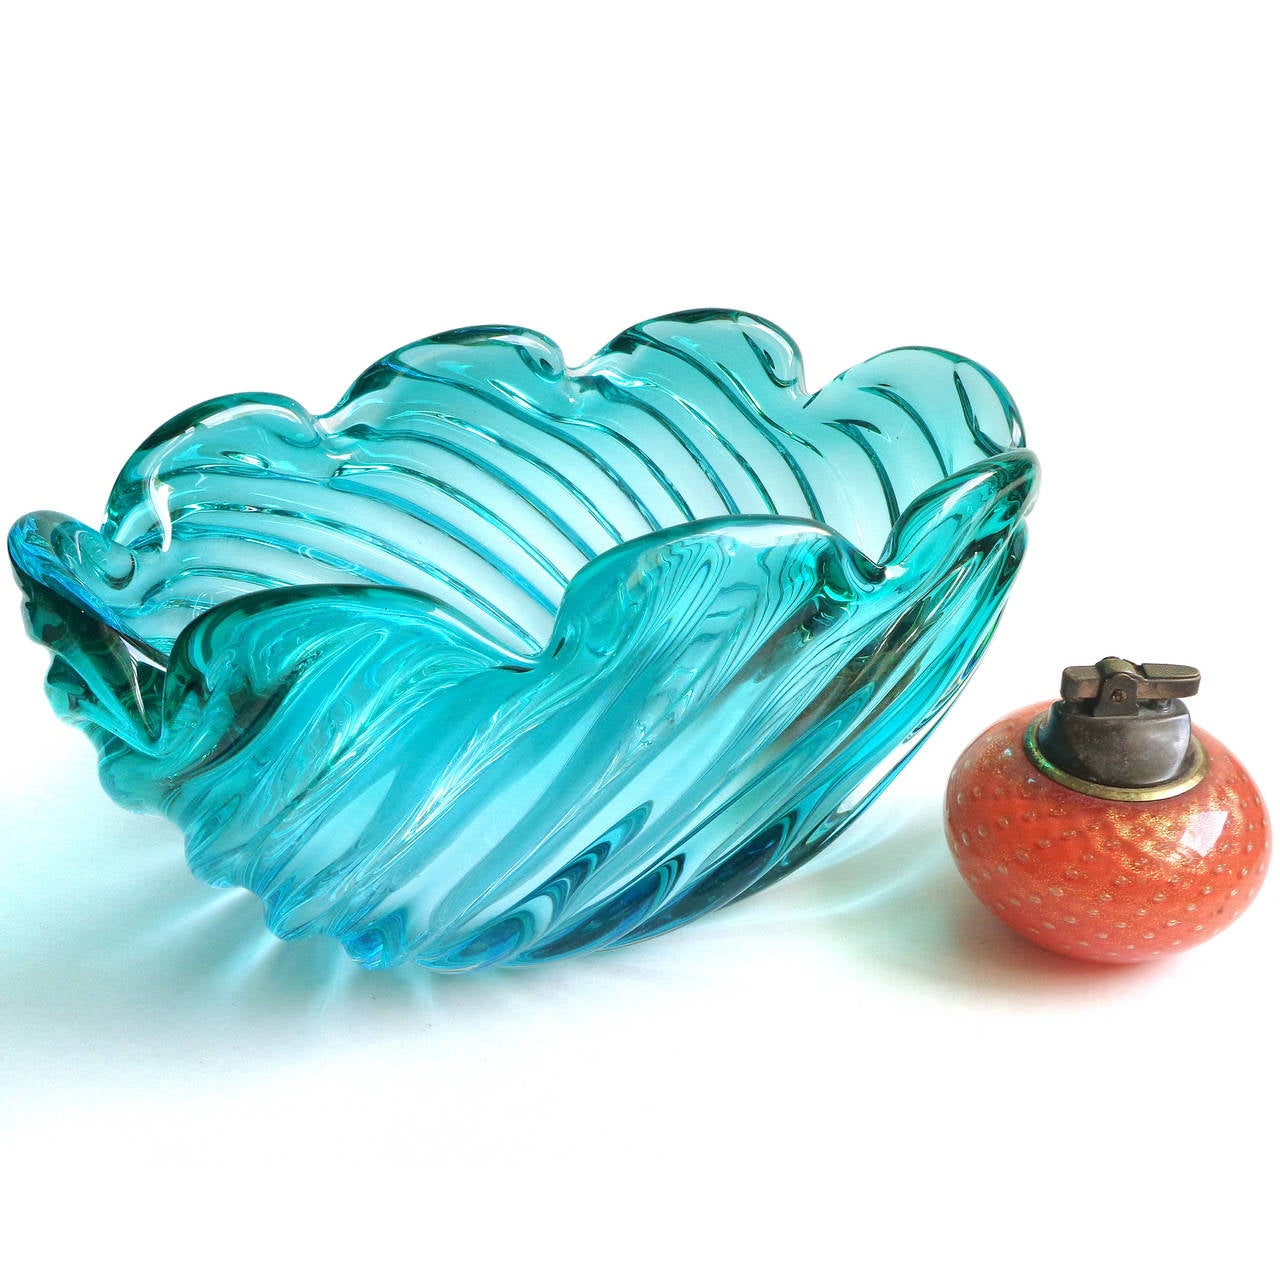 Free shipping worldwide! See details below description.

Beautiful large Murano handblown aqua blue green Sommerso art glass center bowl. Documented to designer Alfredo Barbini. The bowl has a subtle fade in color. In the folds a richer blue and